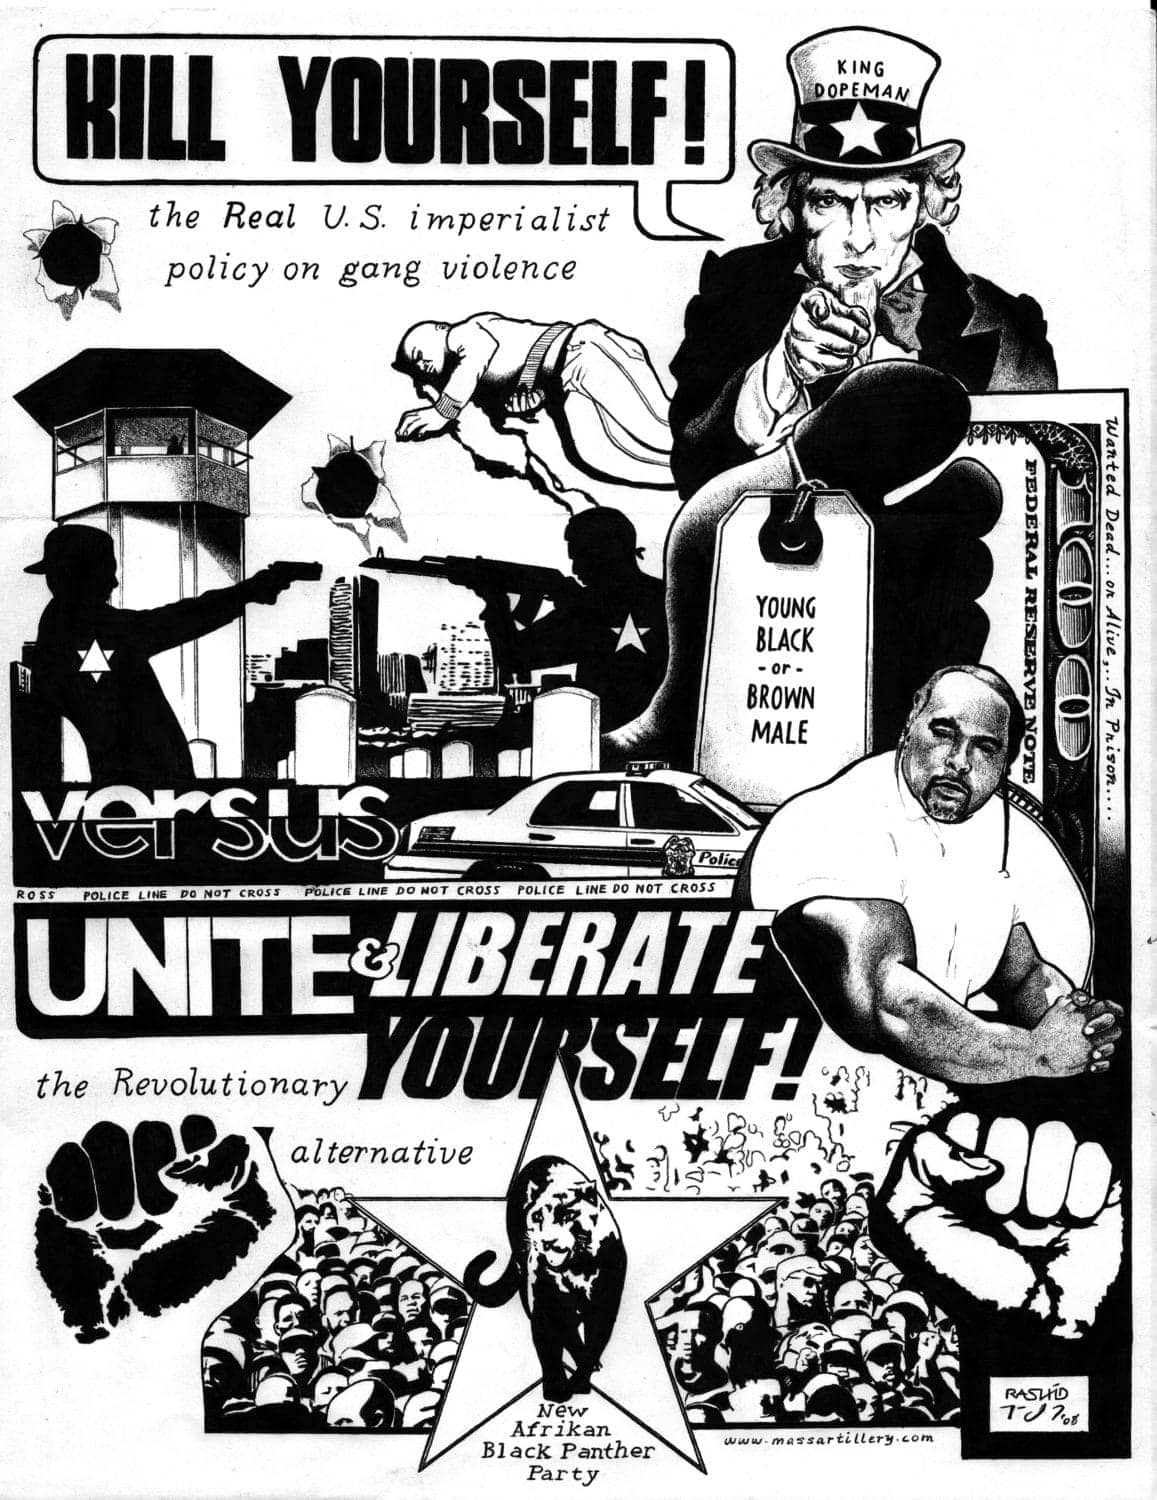 Kill-Yourself-versus-Unite-Liberate-Yourself-art-by-Rashid-2008, Blood in the Clenched Fist Alliance, Behind Enemy Lines 